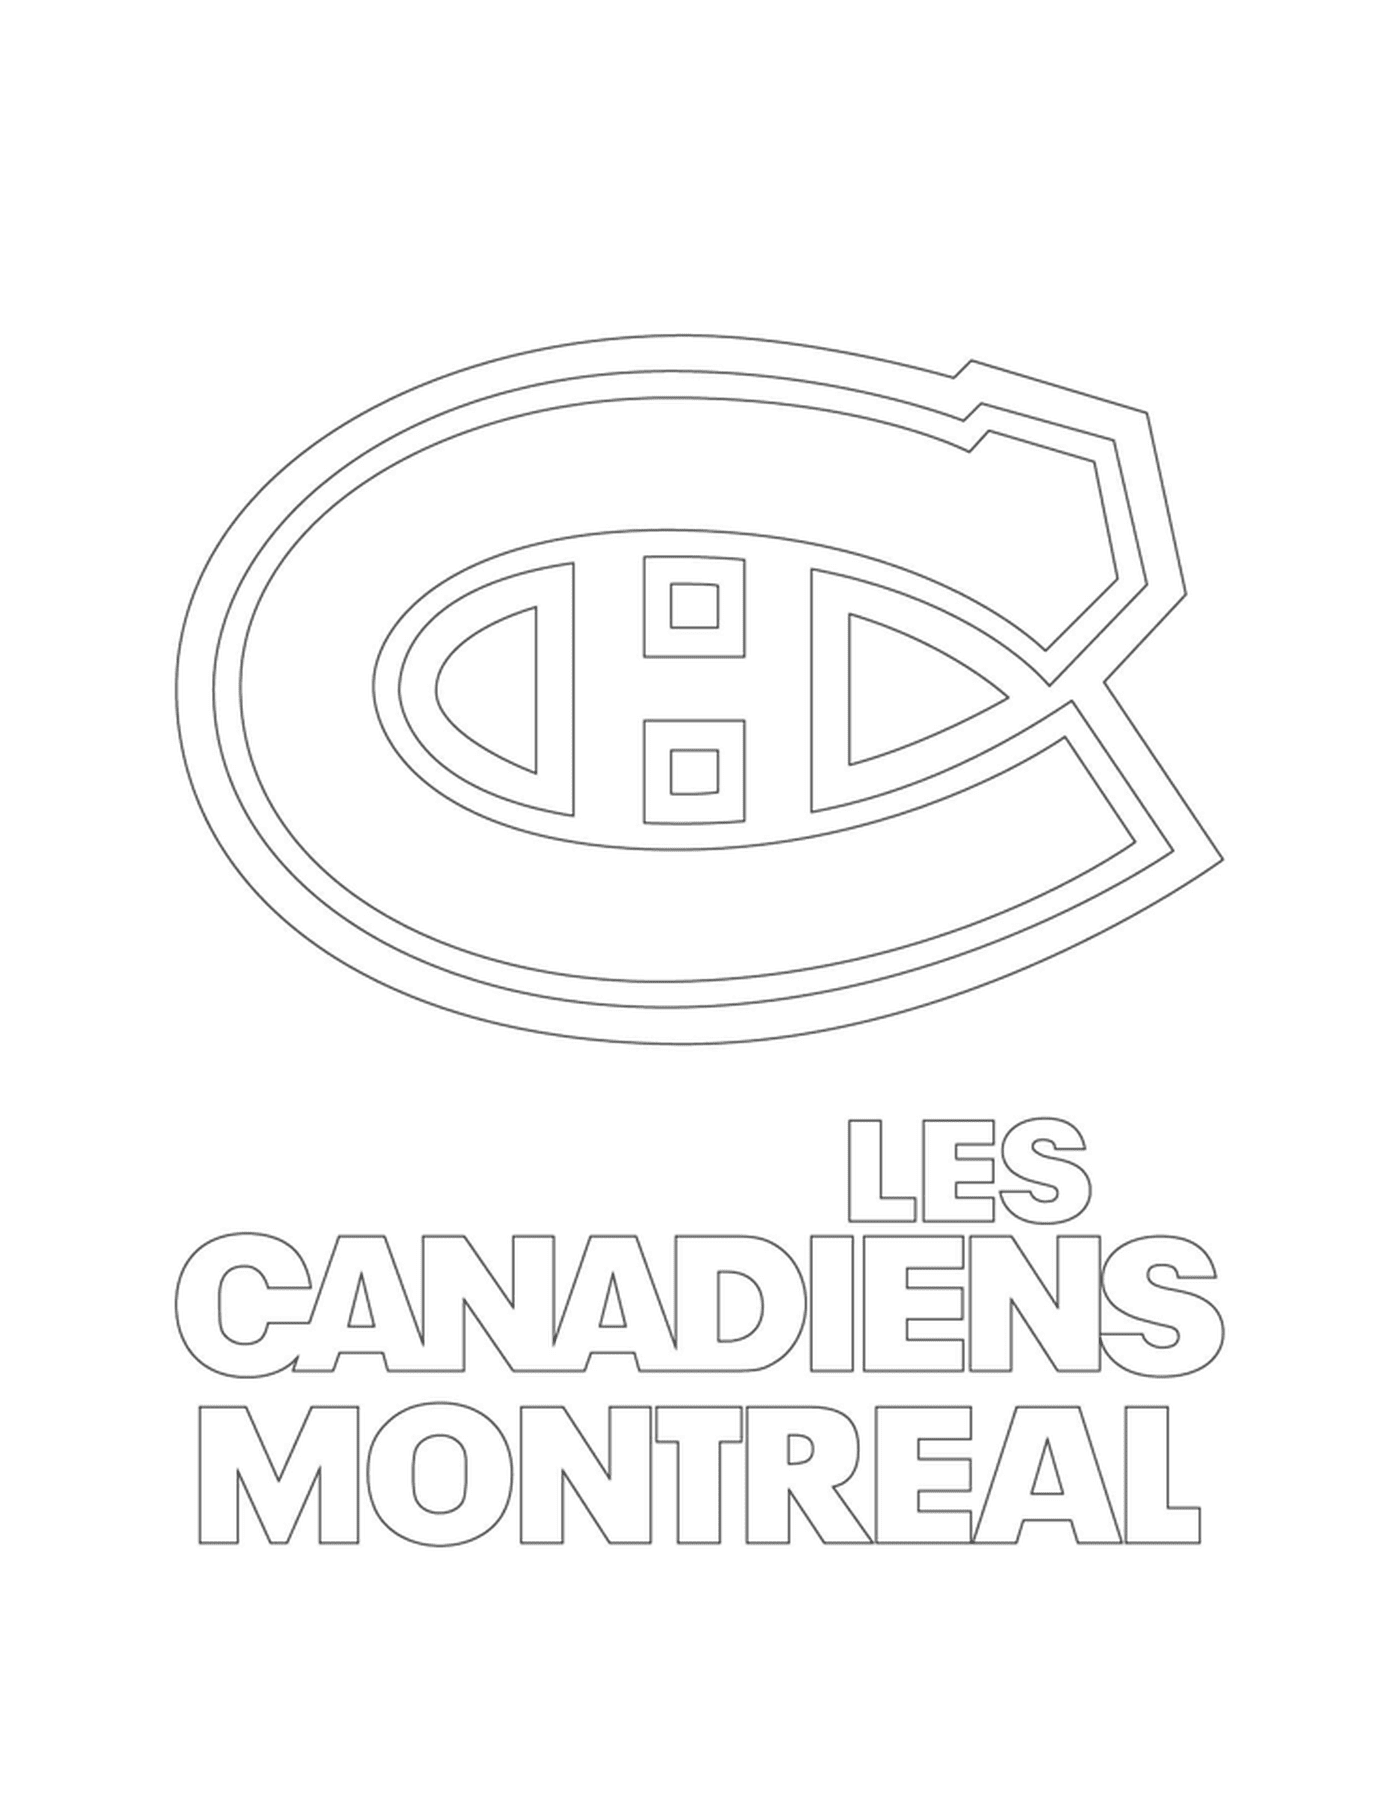  Logo of the Montreal Canadiens 